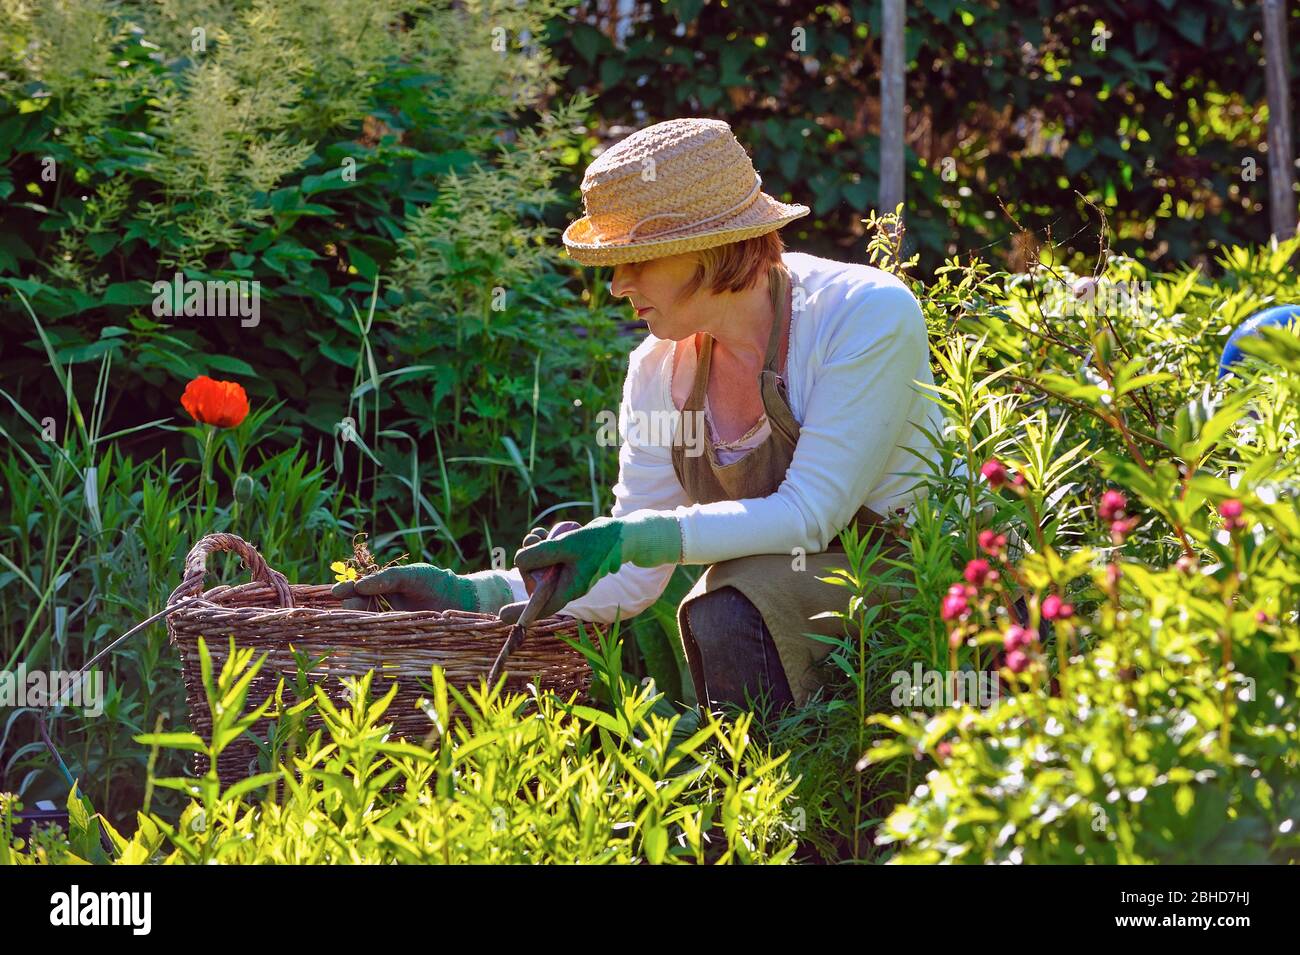 A woman in straw hat working with weeding in the garden Stock Photo